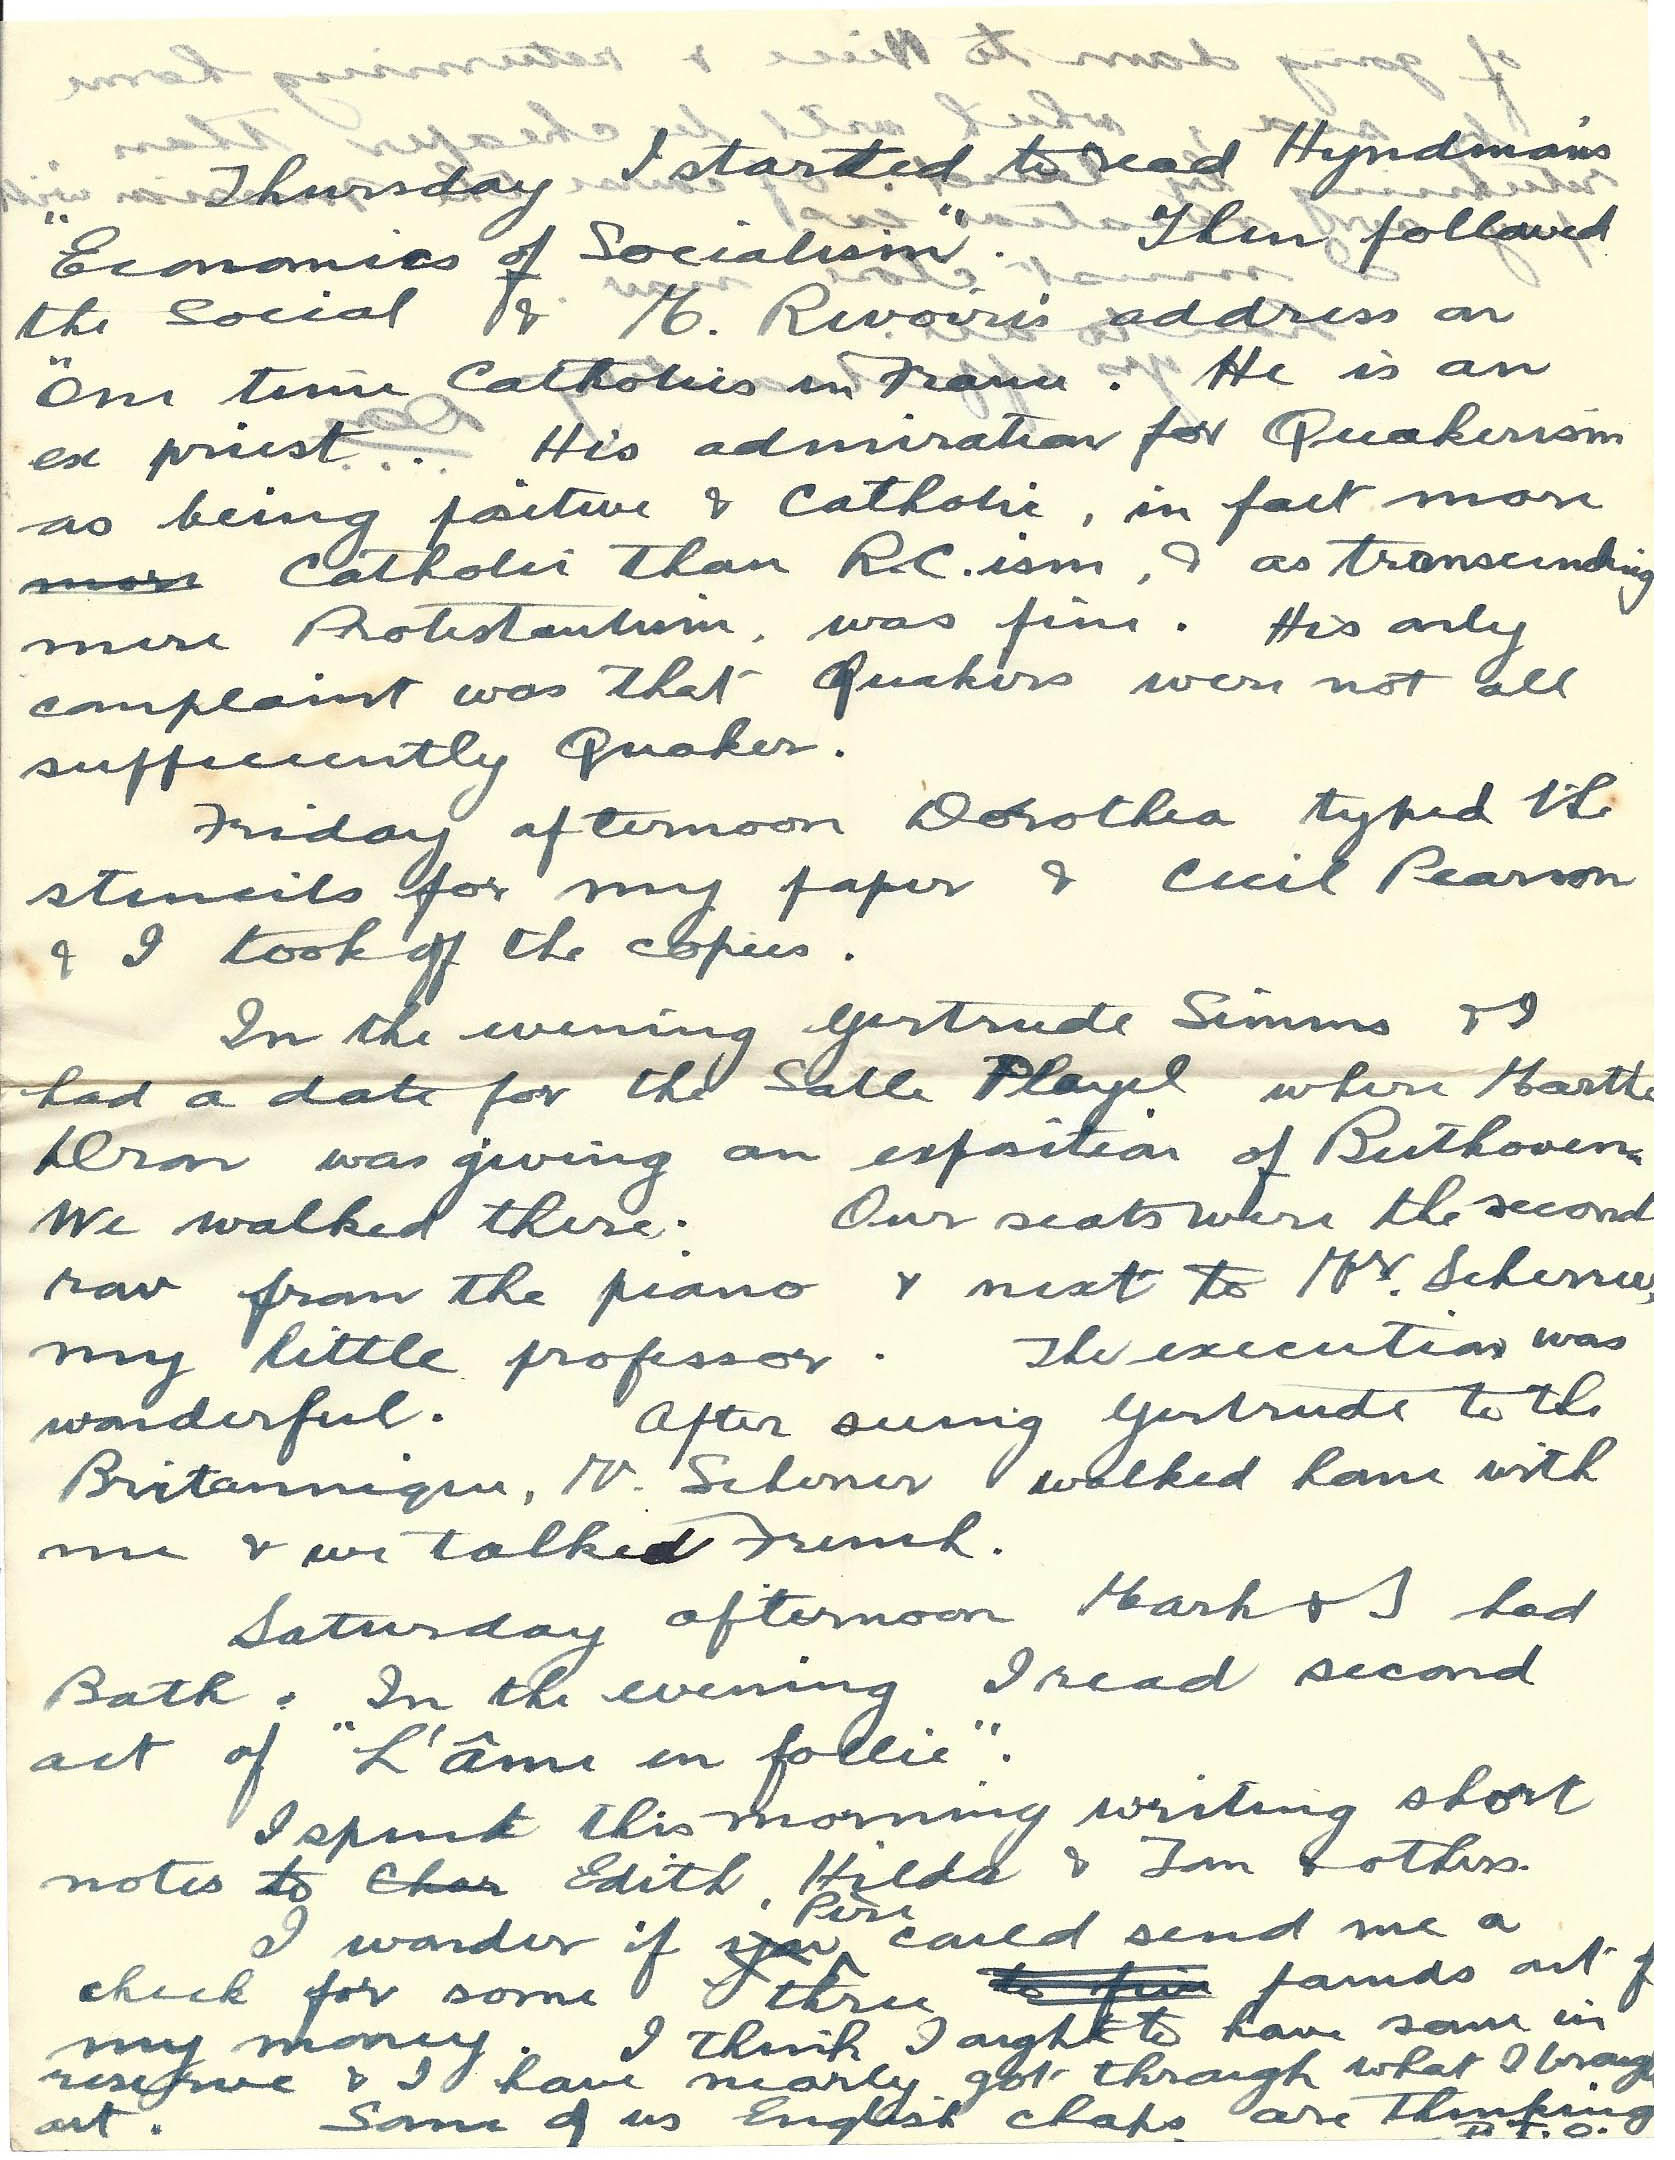 1920-02-22 p2 Donald Bearman letter to his father